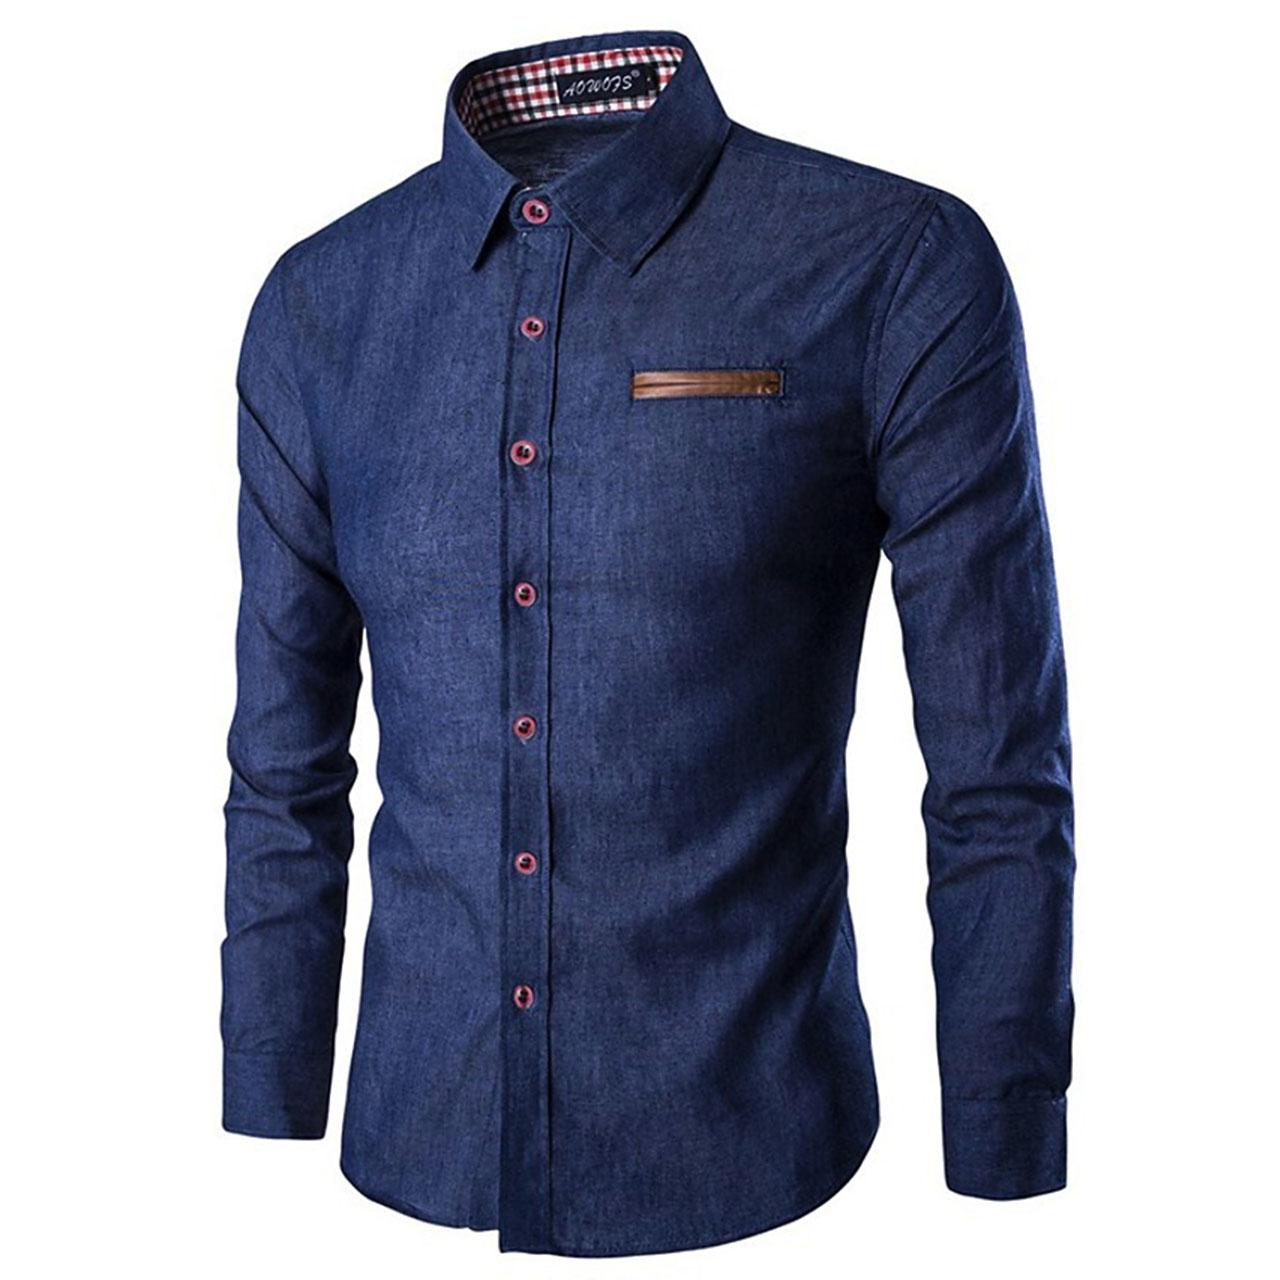 Mens Dark Blue Long Sleeve Shirt Solid Colored Daily Work Holiday Outfit